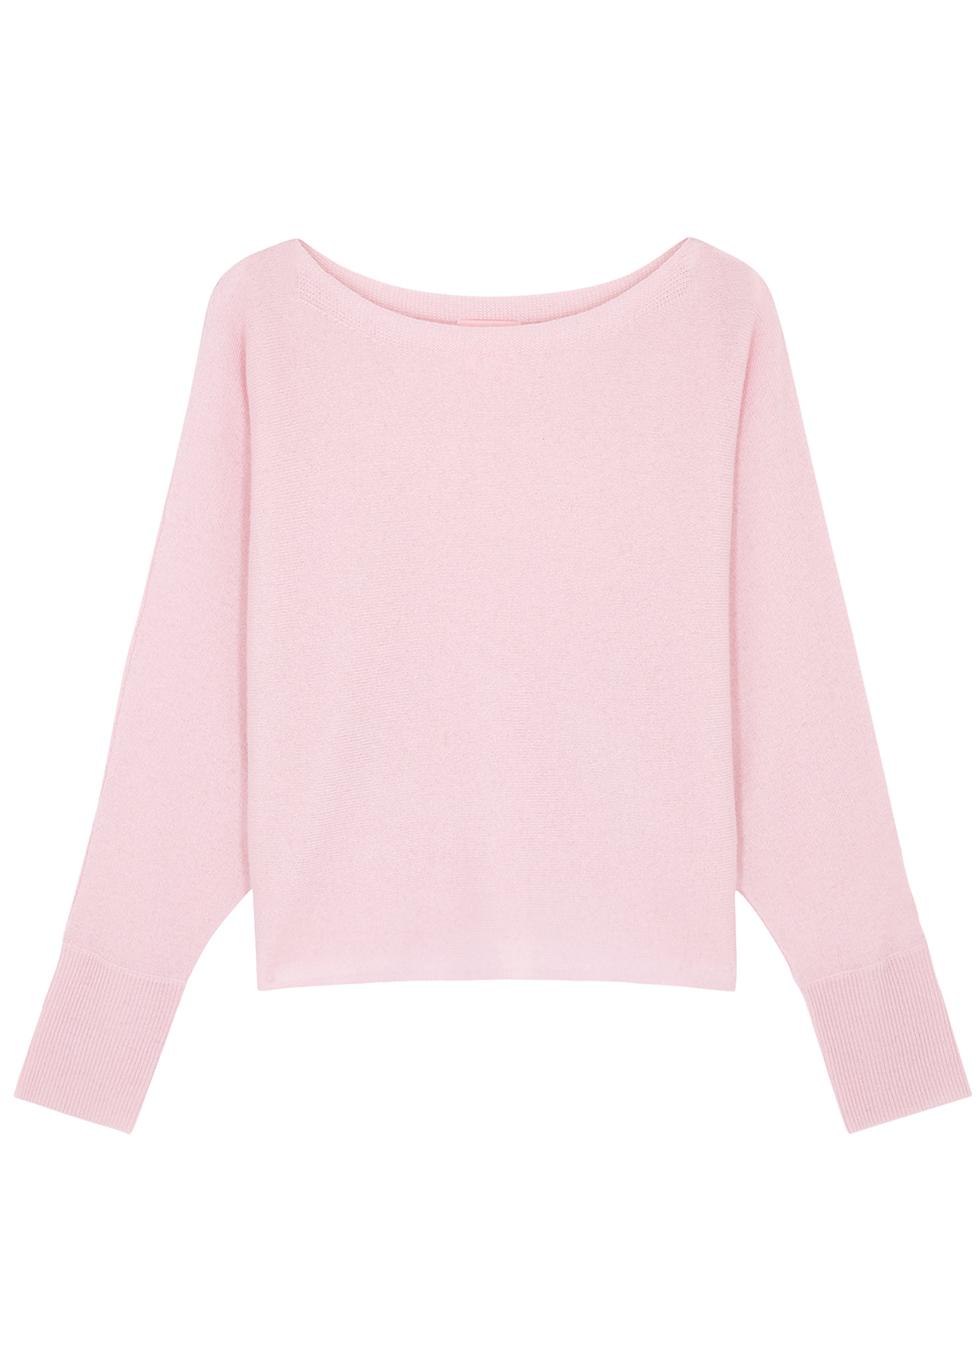 Yangon cashmere jumper by CRUSH CASHMERE